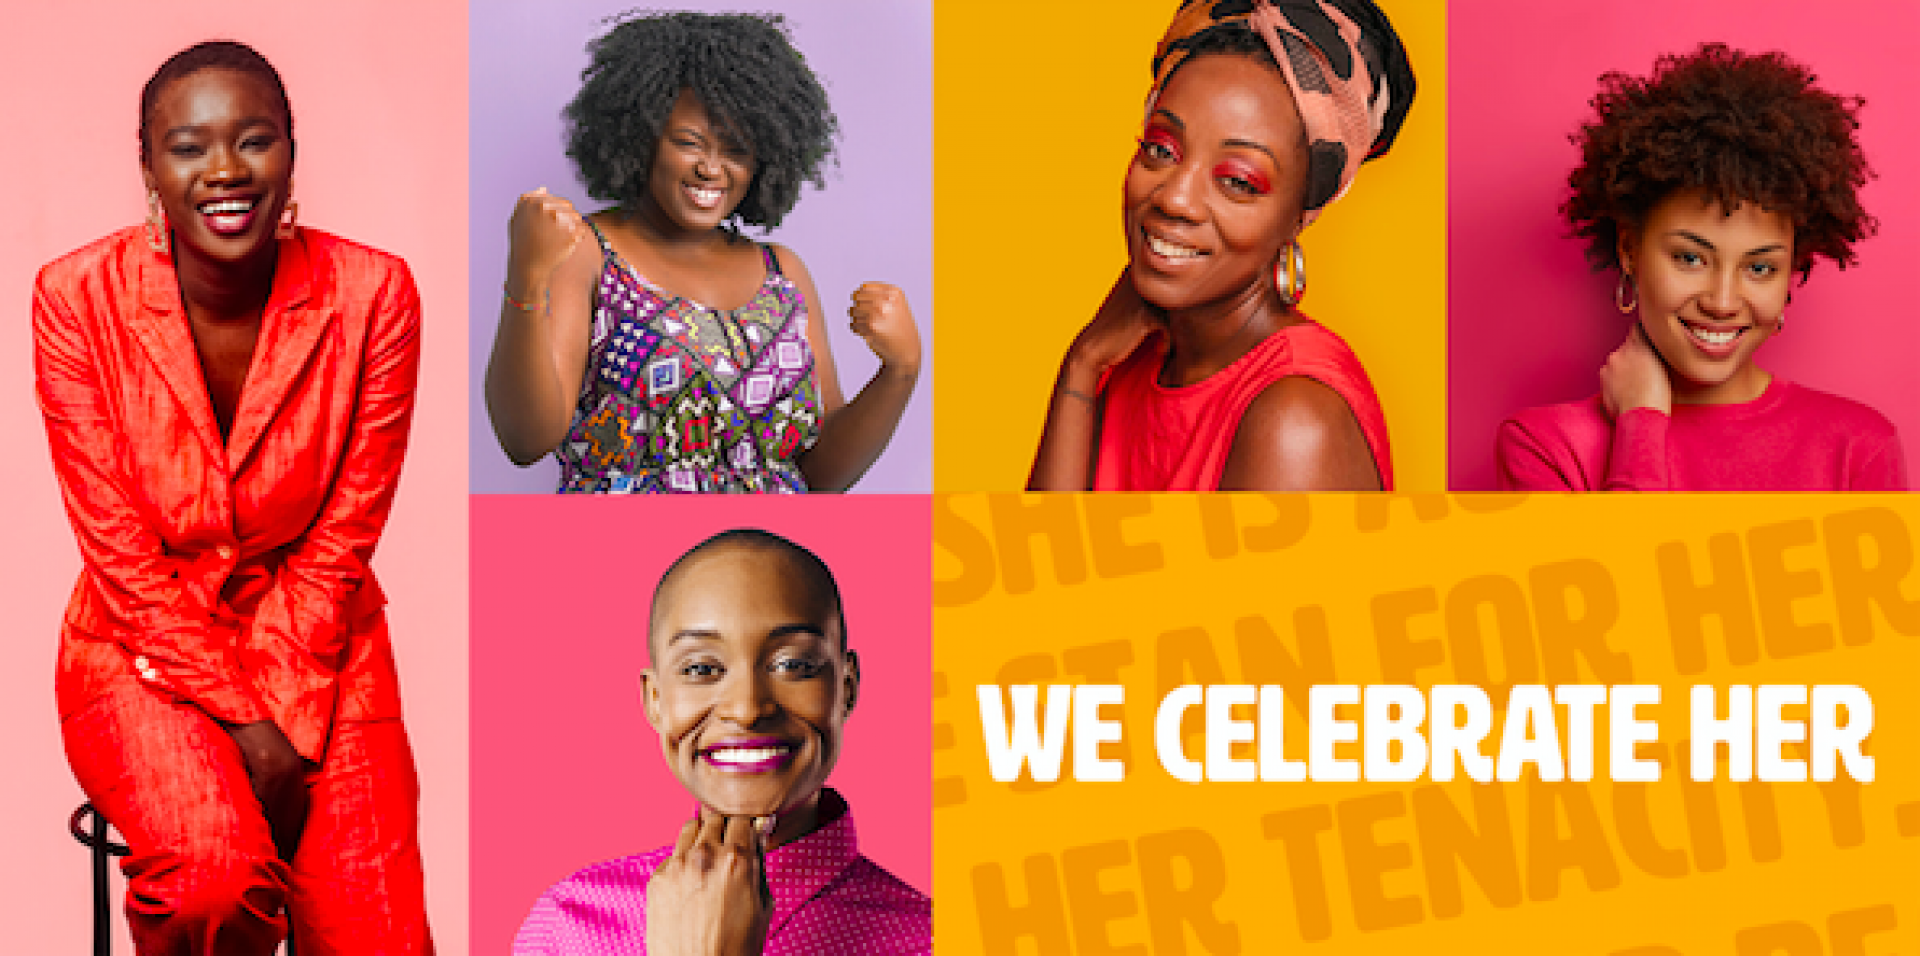 Barefoot Awards $50,000 To Black Women-Owned Businesses With #WeStanForHer Campaign